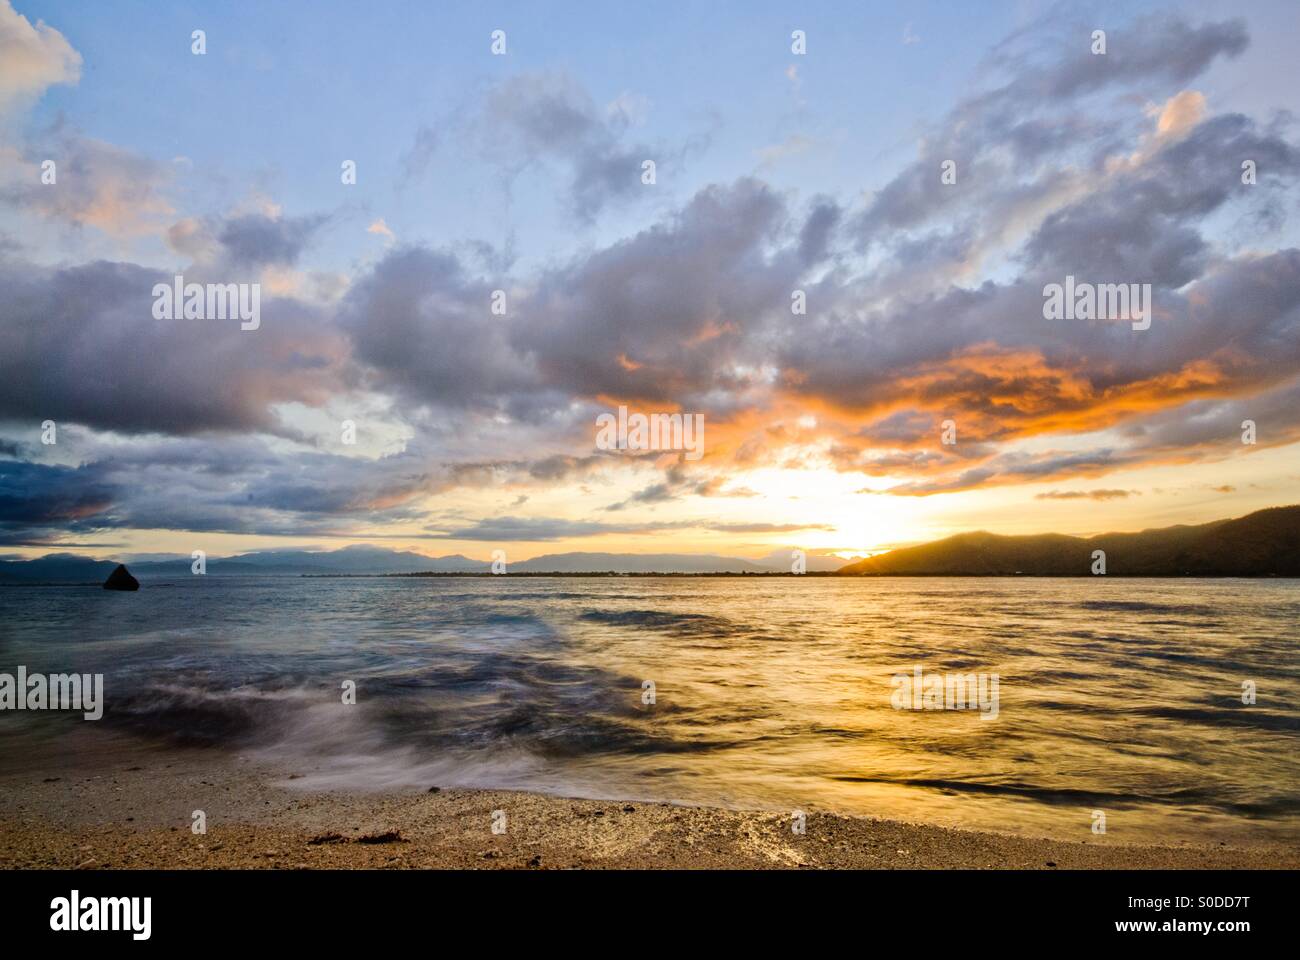 Sunrise at the beach. A summer vacation. Stock Photo